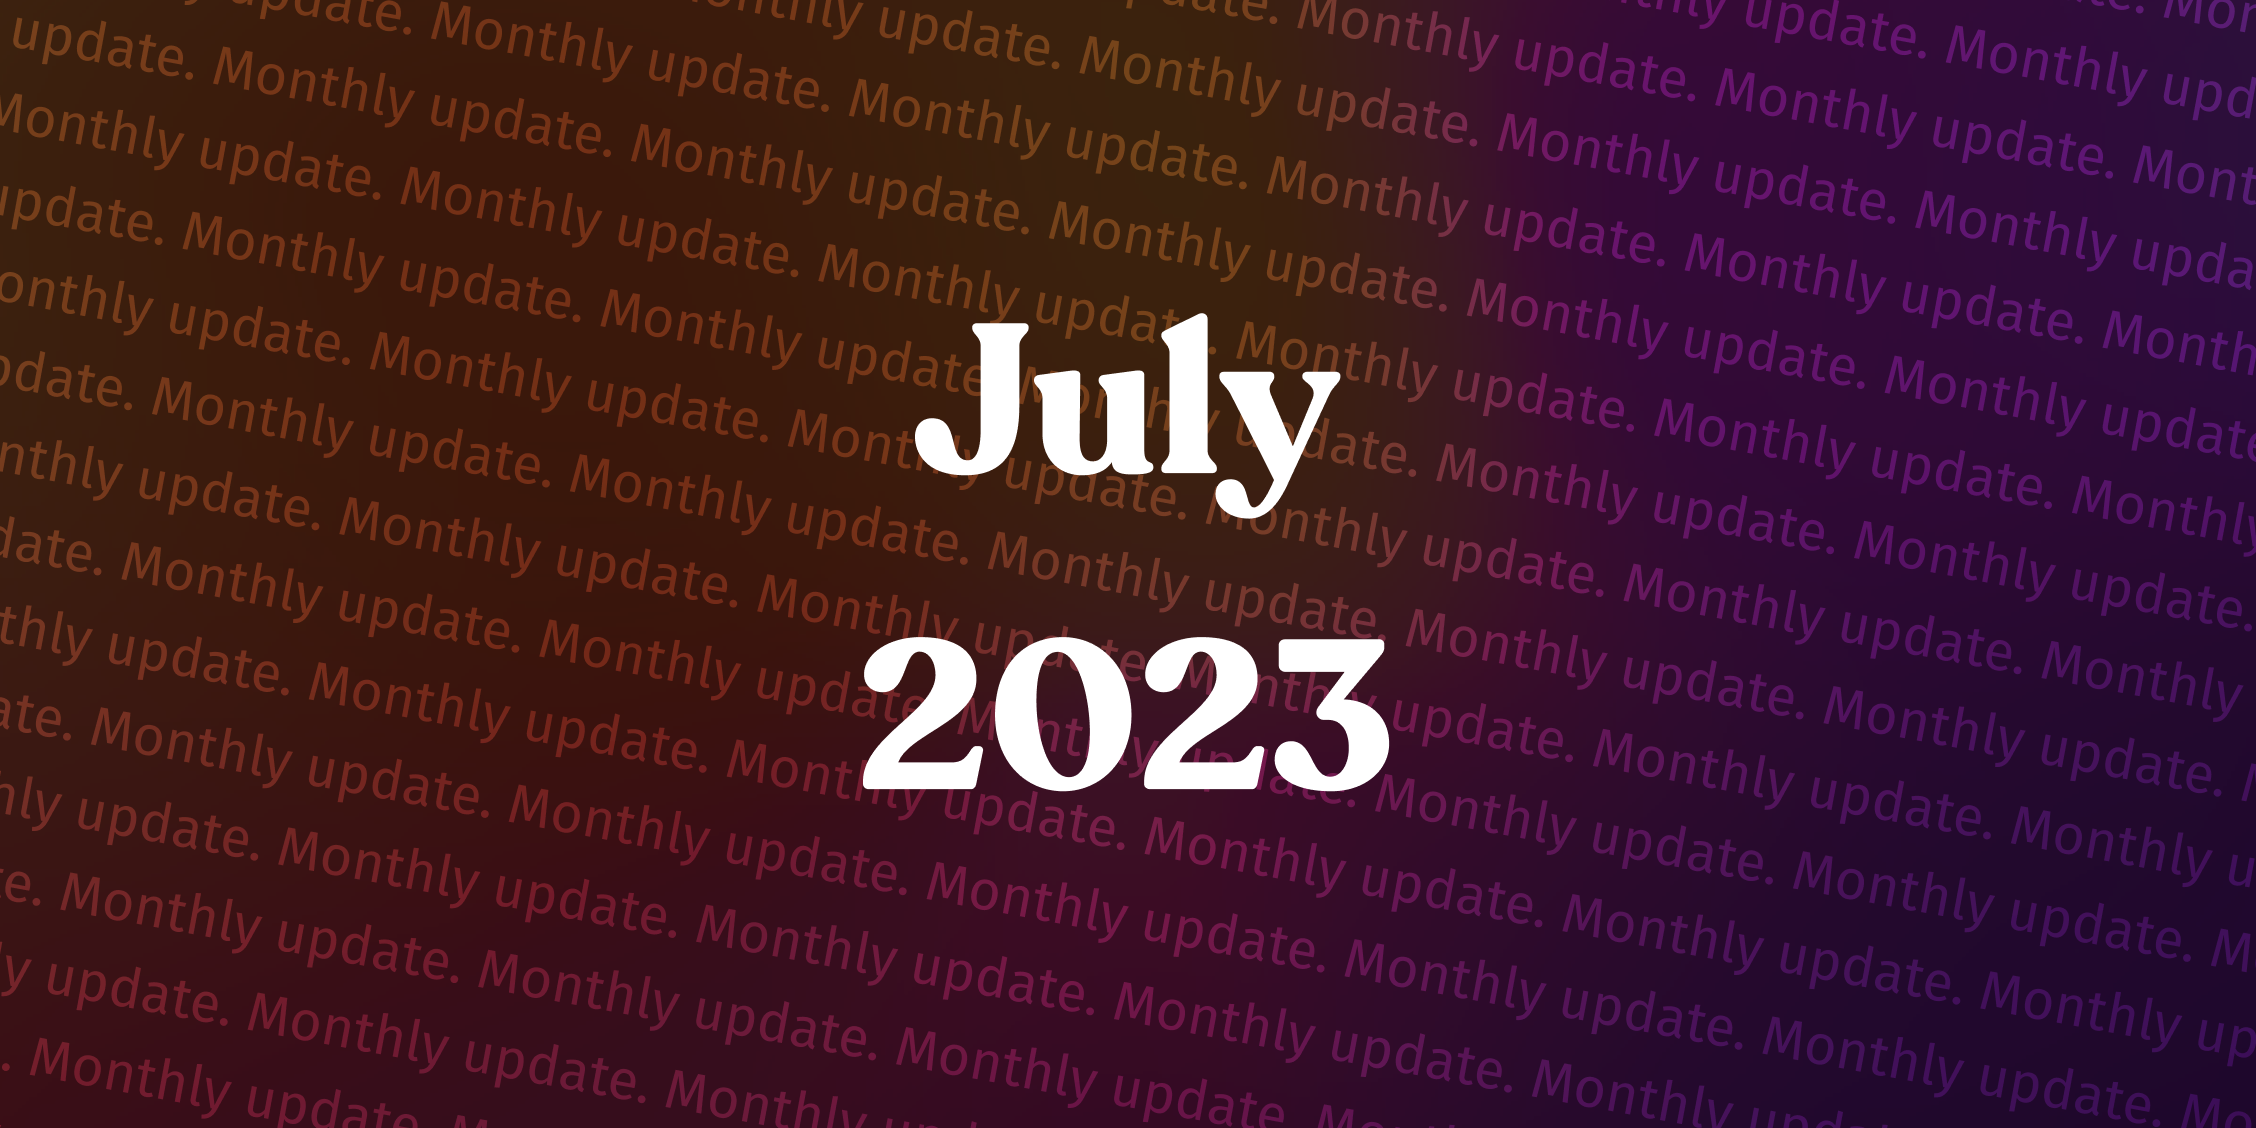 What’s new in Pausly, July 2023